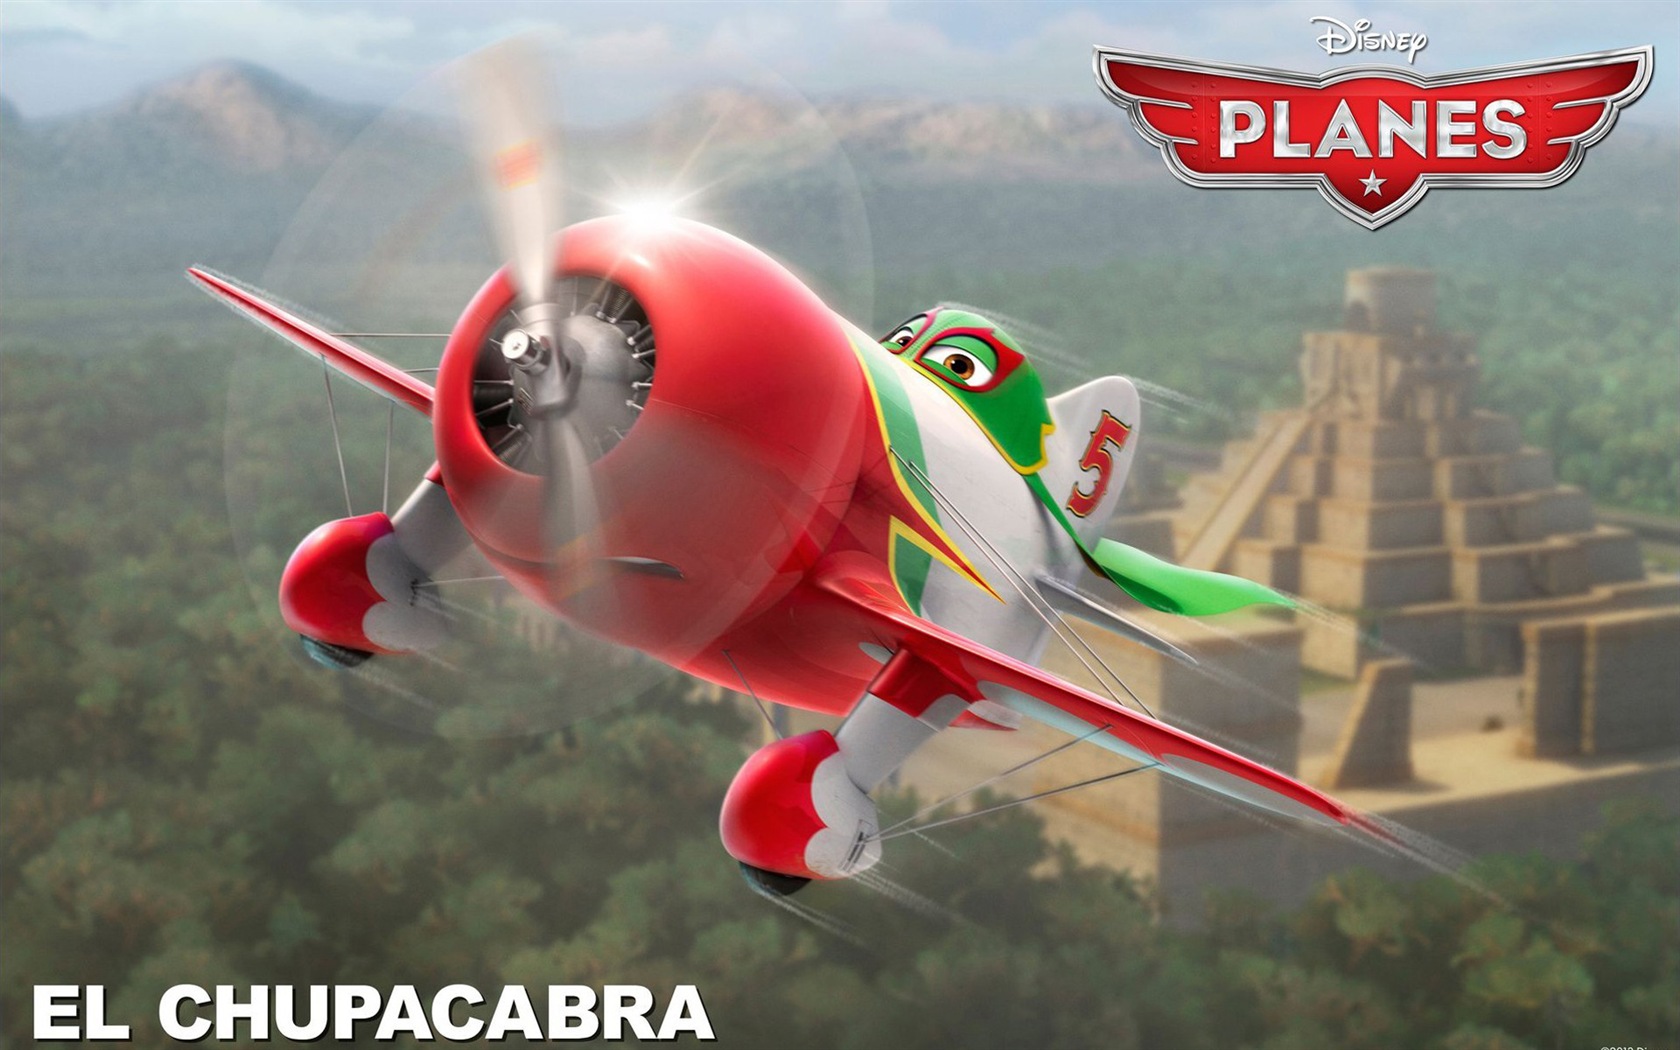 Planes 2013 HD wallpapers #17 - 1680x1050